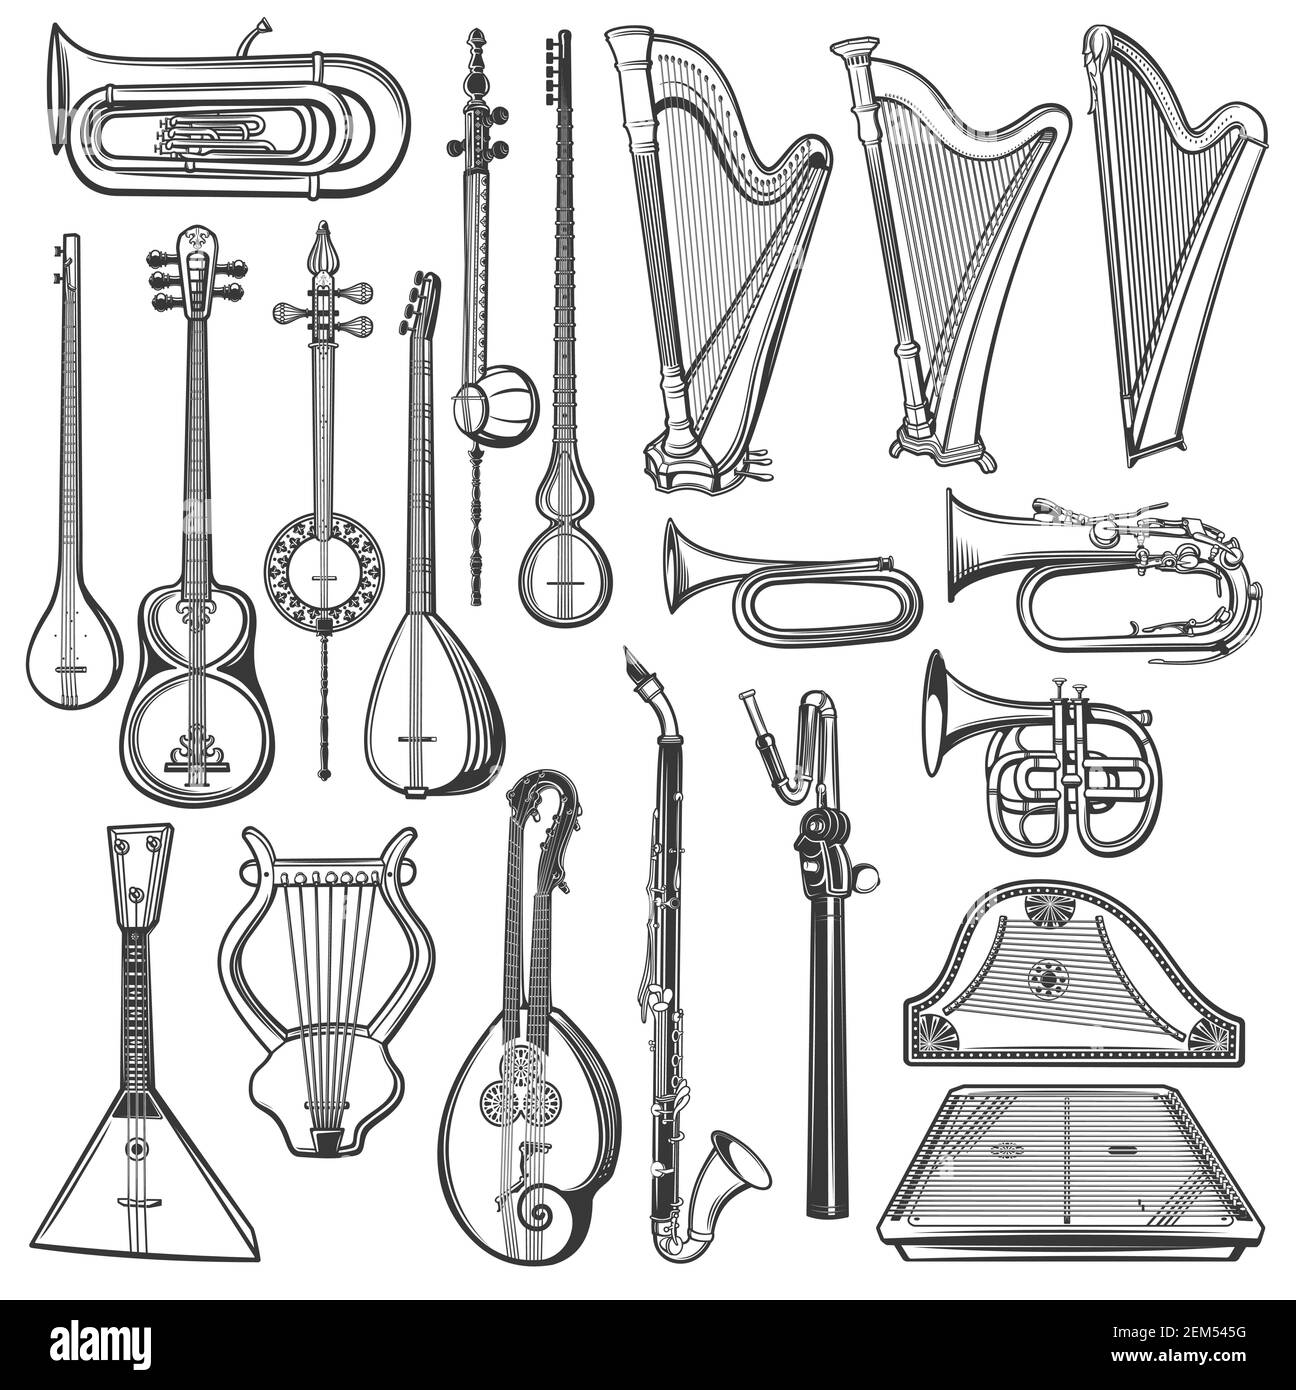 Musical instruments, vector sketch. Isolated harps, tuba, bugle and clarinet, trumpet, vintage lyre, balalaika and gusli, cornet and cymbalo, tar and Stock Vector